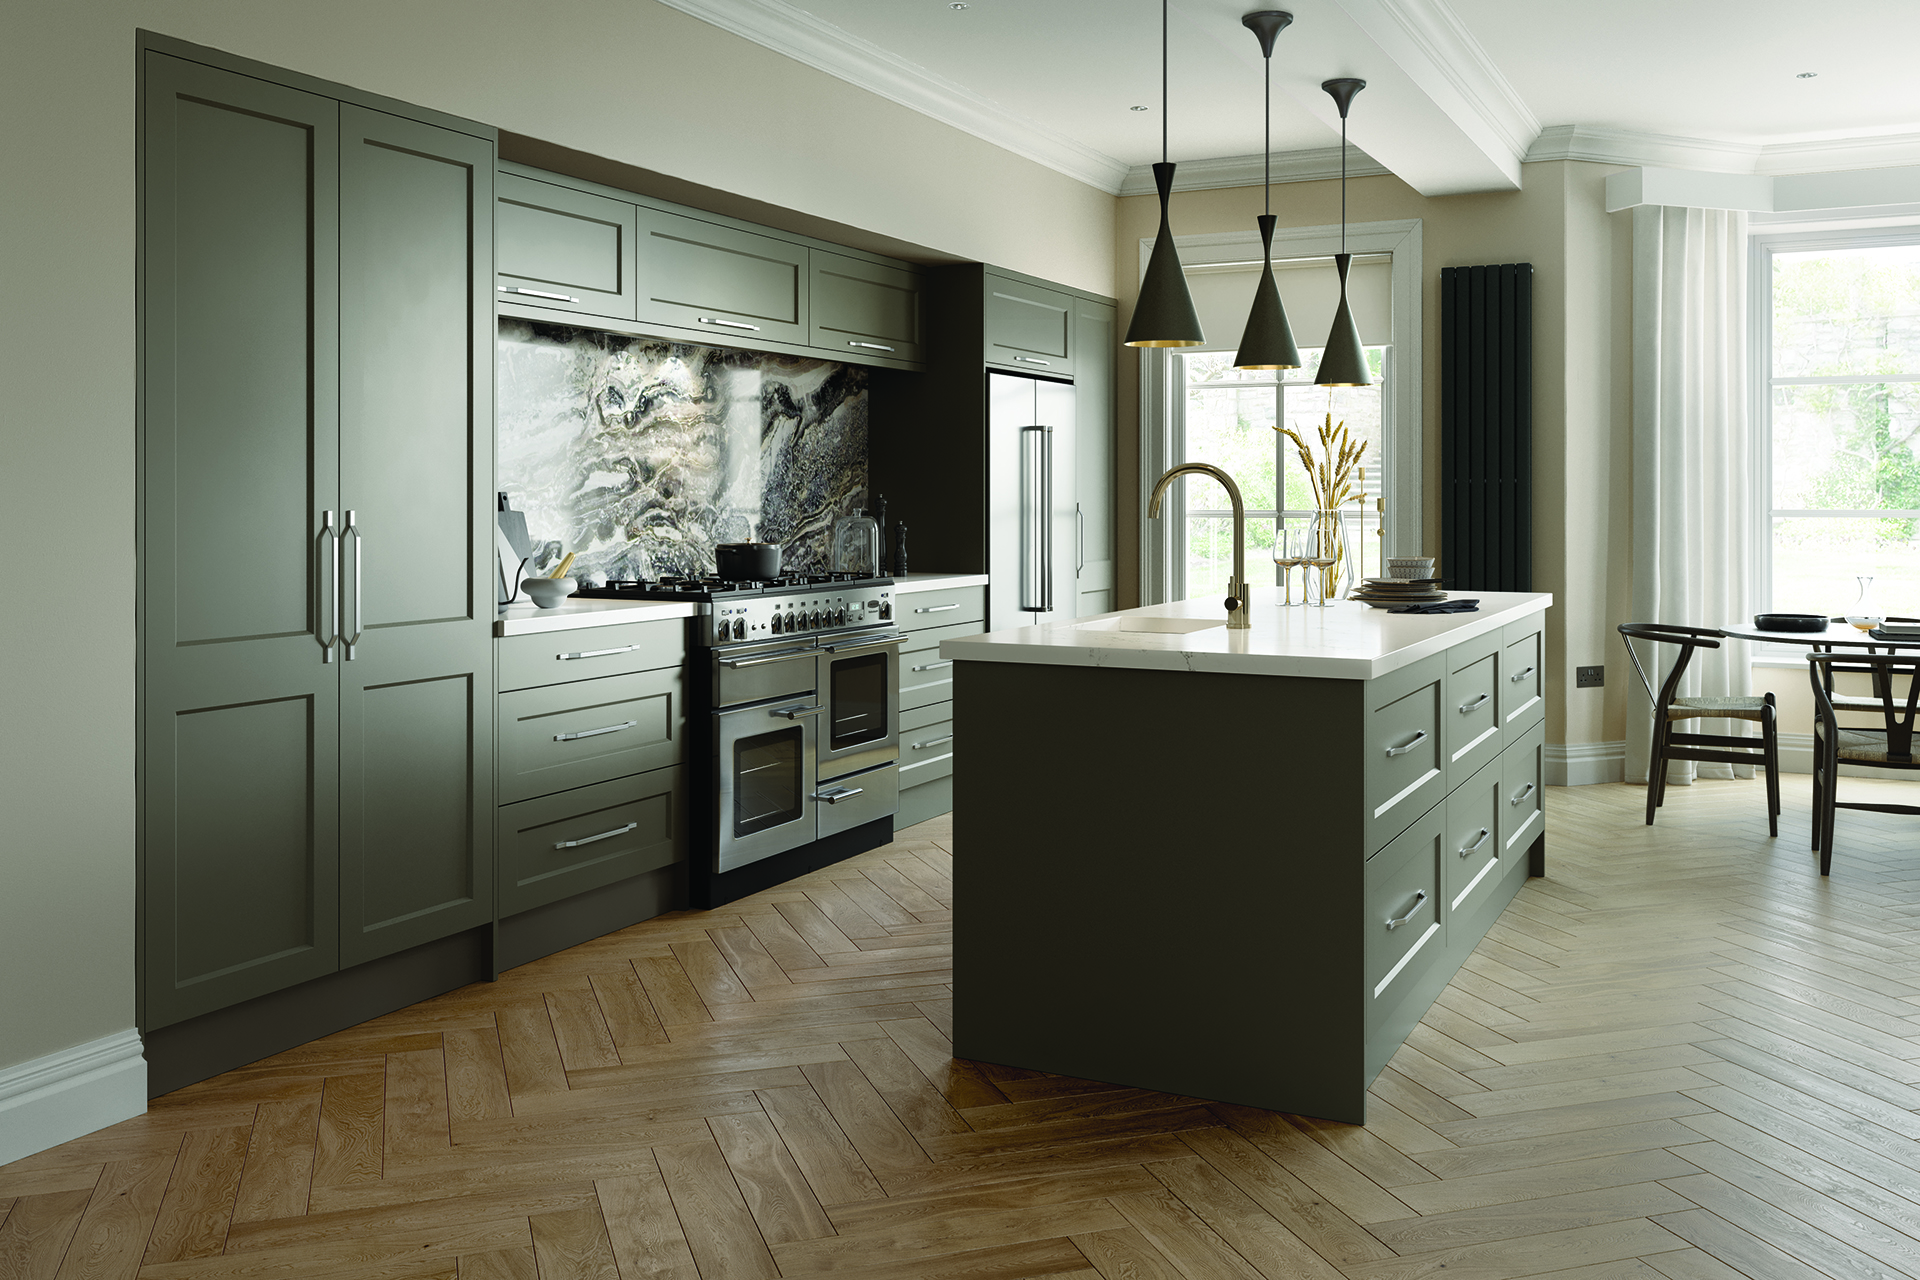 6. We wish you a Bella Richmond Matt Taupe kitchen in your home to enjoy everyday